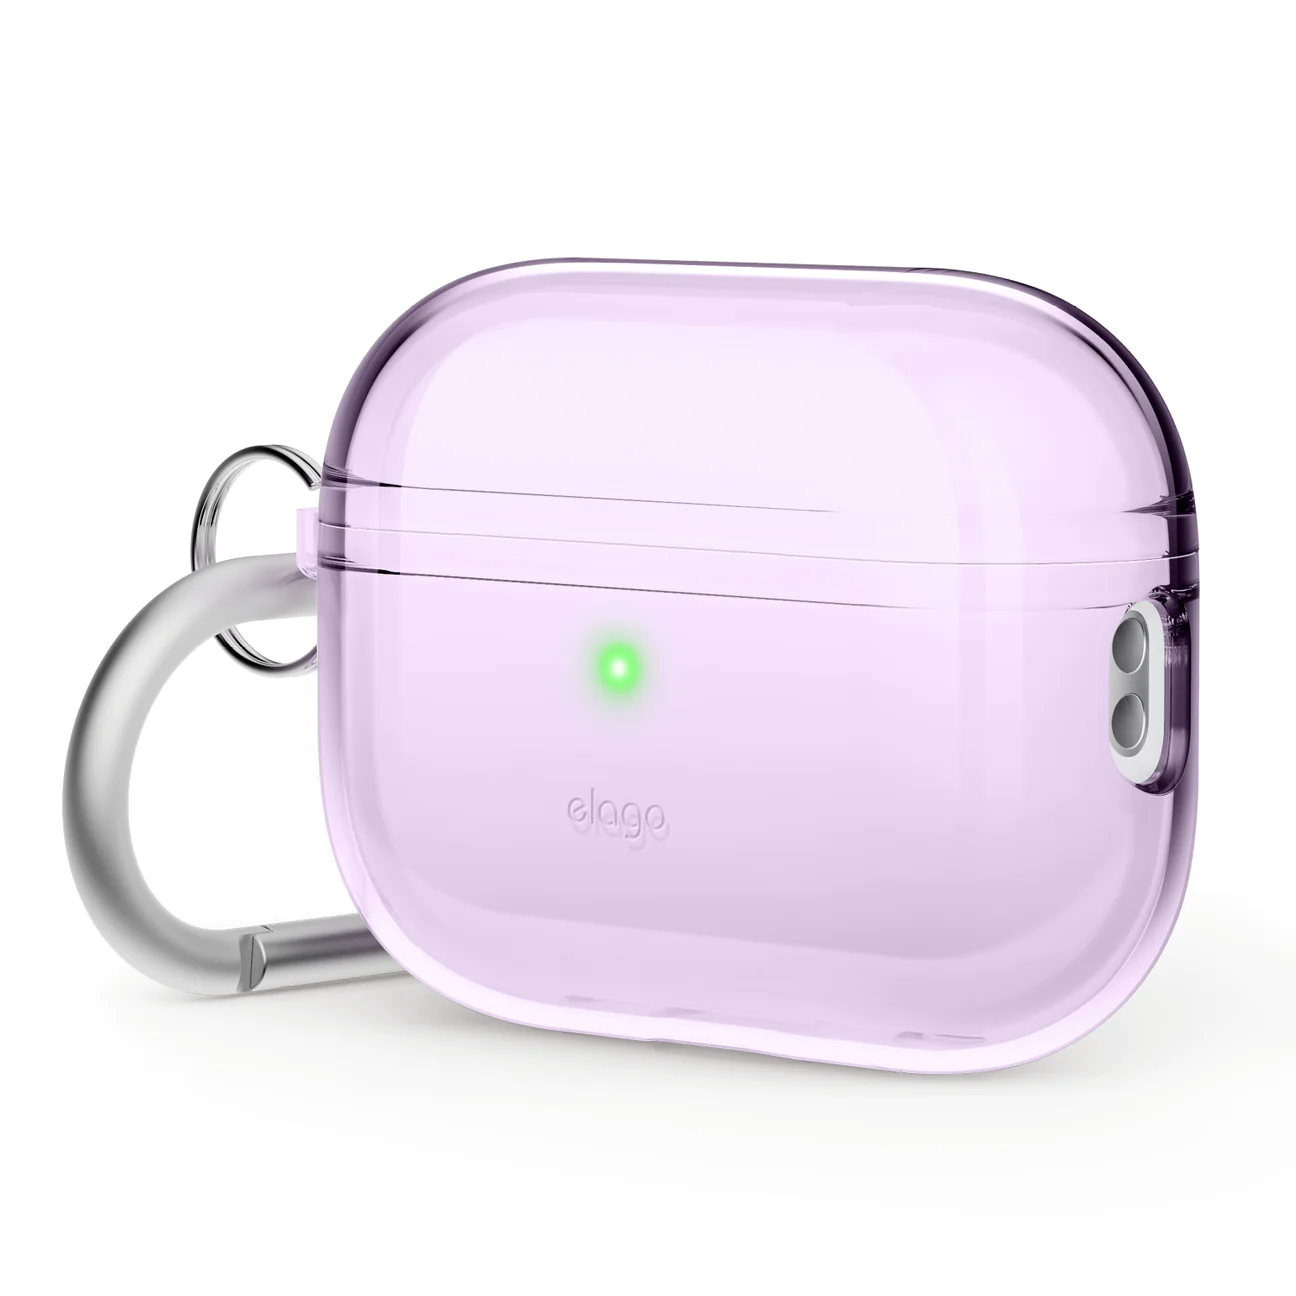 Elago Clear Hang case for AirPods Pro 2 - Lavender (EAPP2CL-HANG-LV)